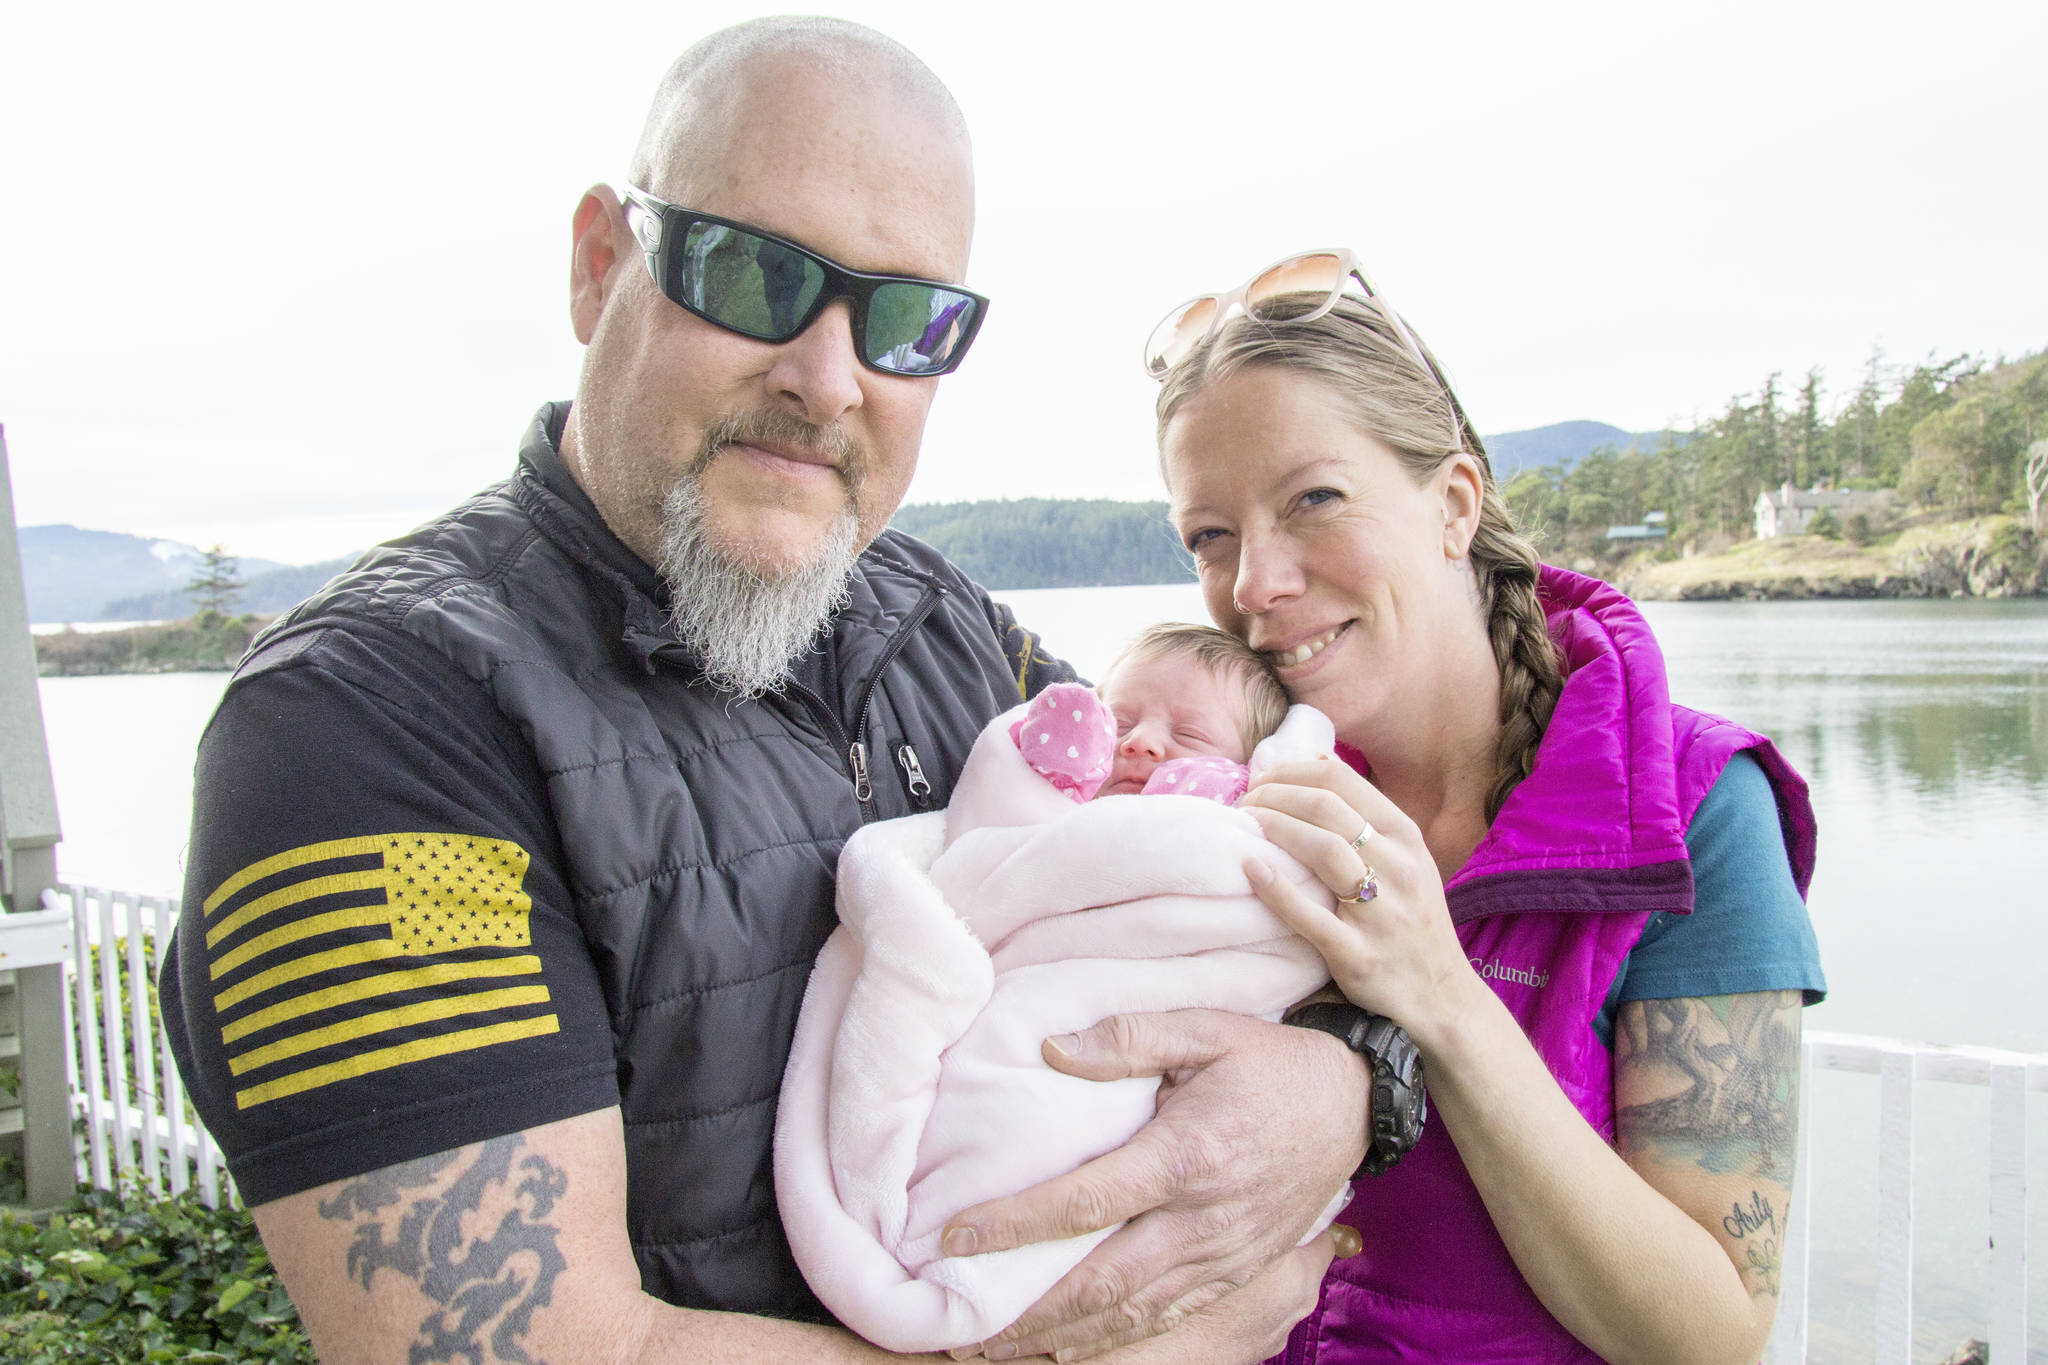 Orcas resident Hannah Beemer wins baby derby